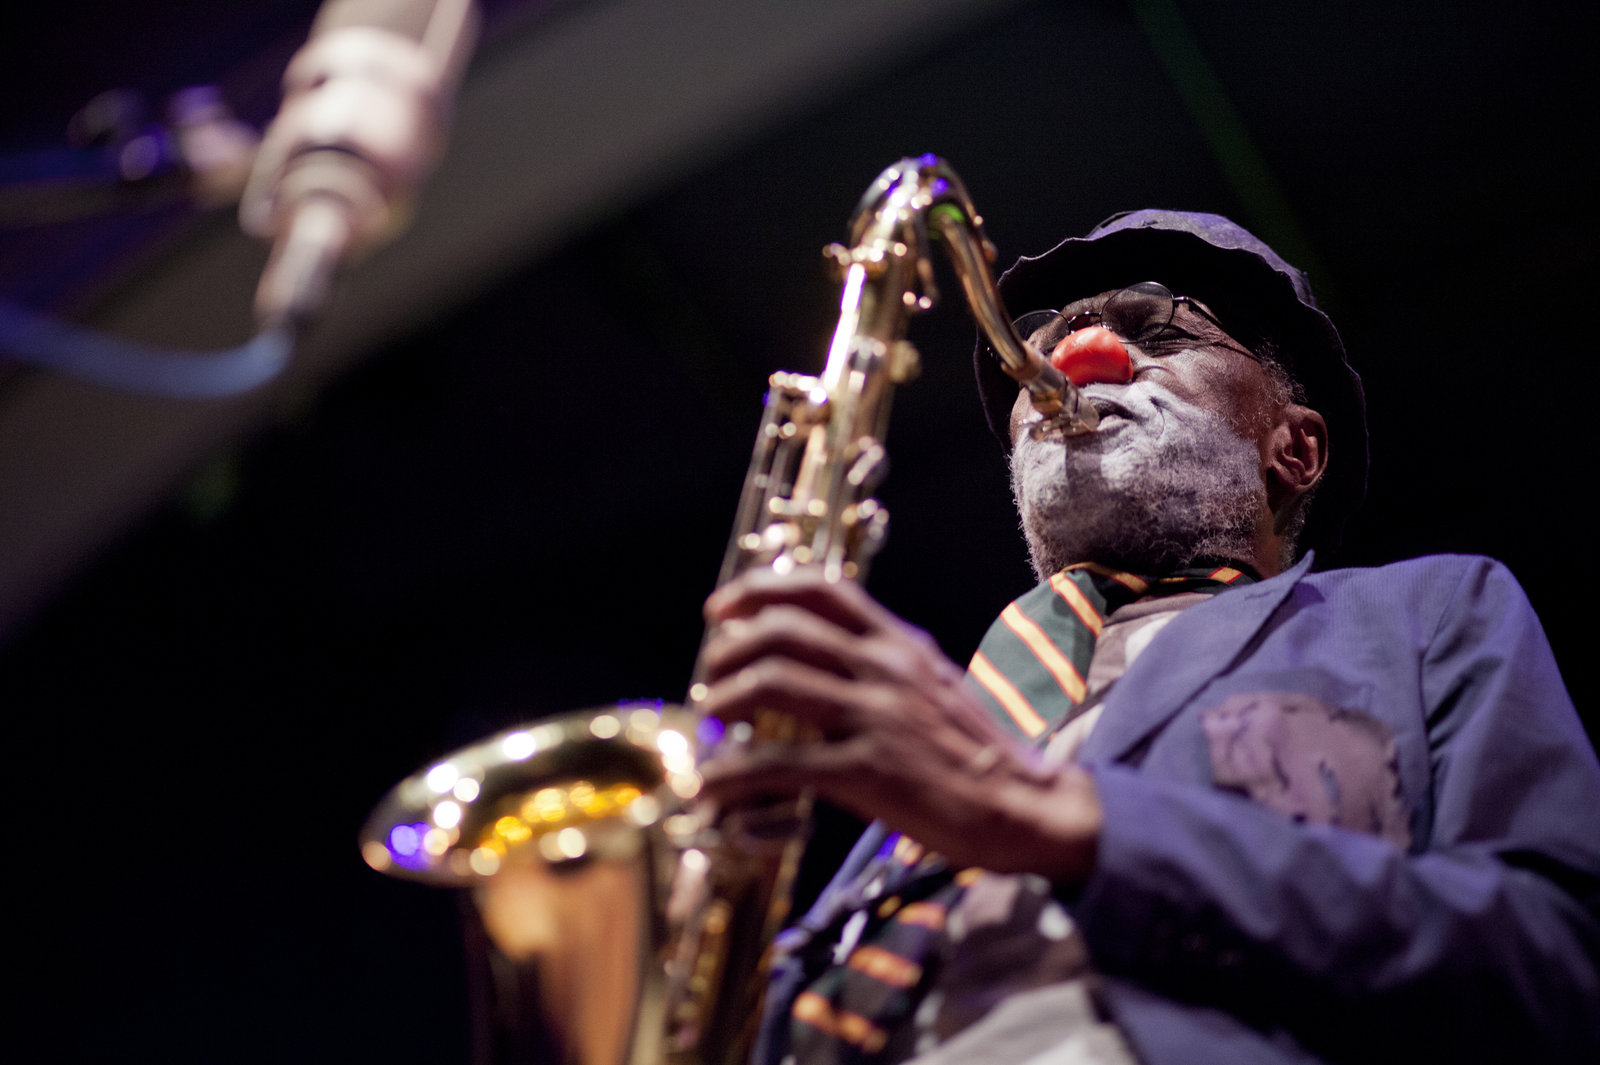 The Future Of Intense Art: A Free-Jazz Event Looks Forward
 By John Rogers - NYC Photography